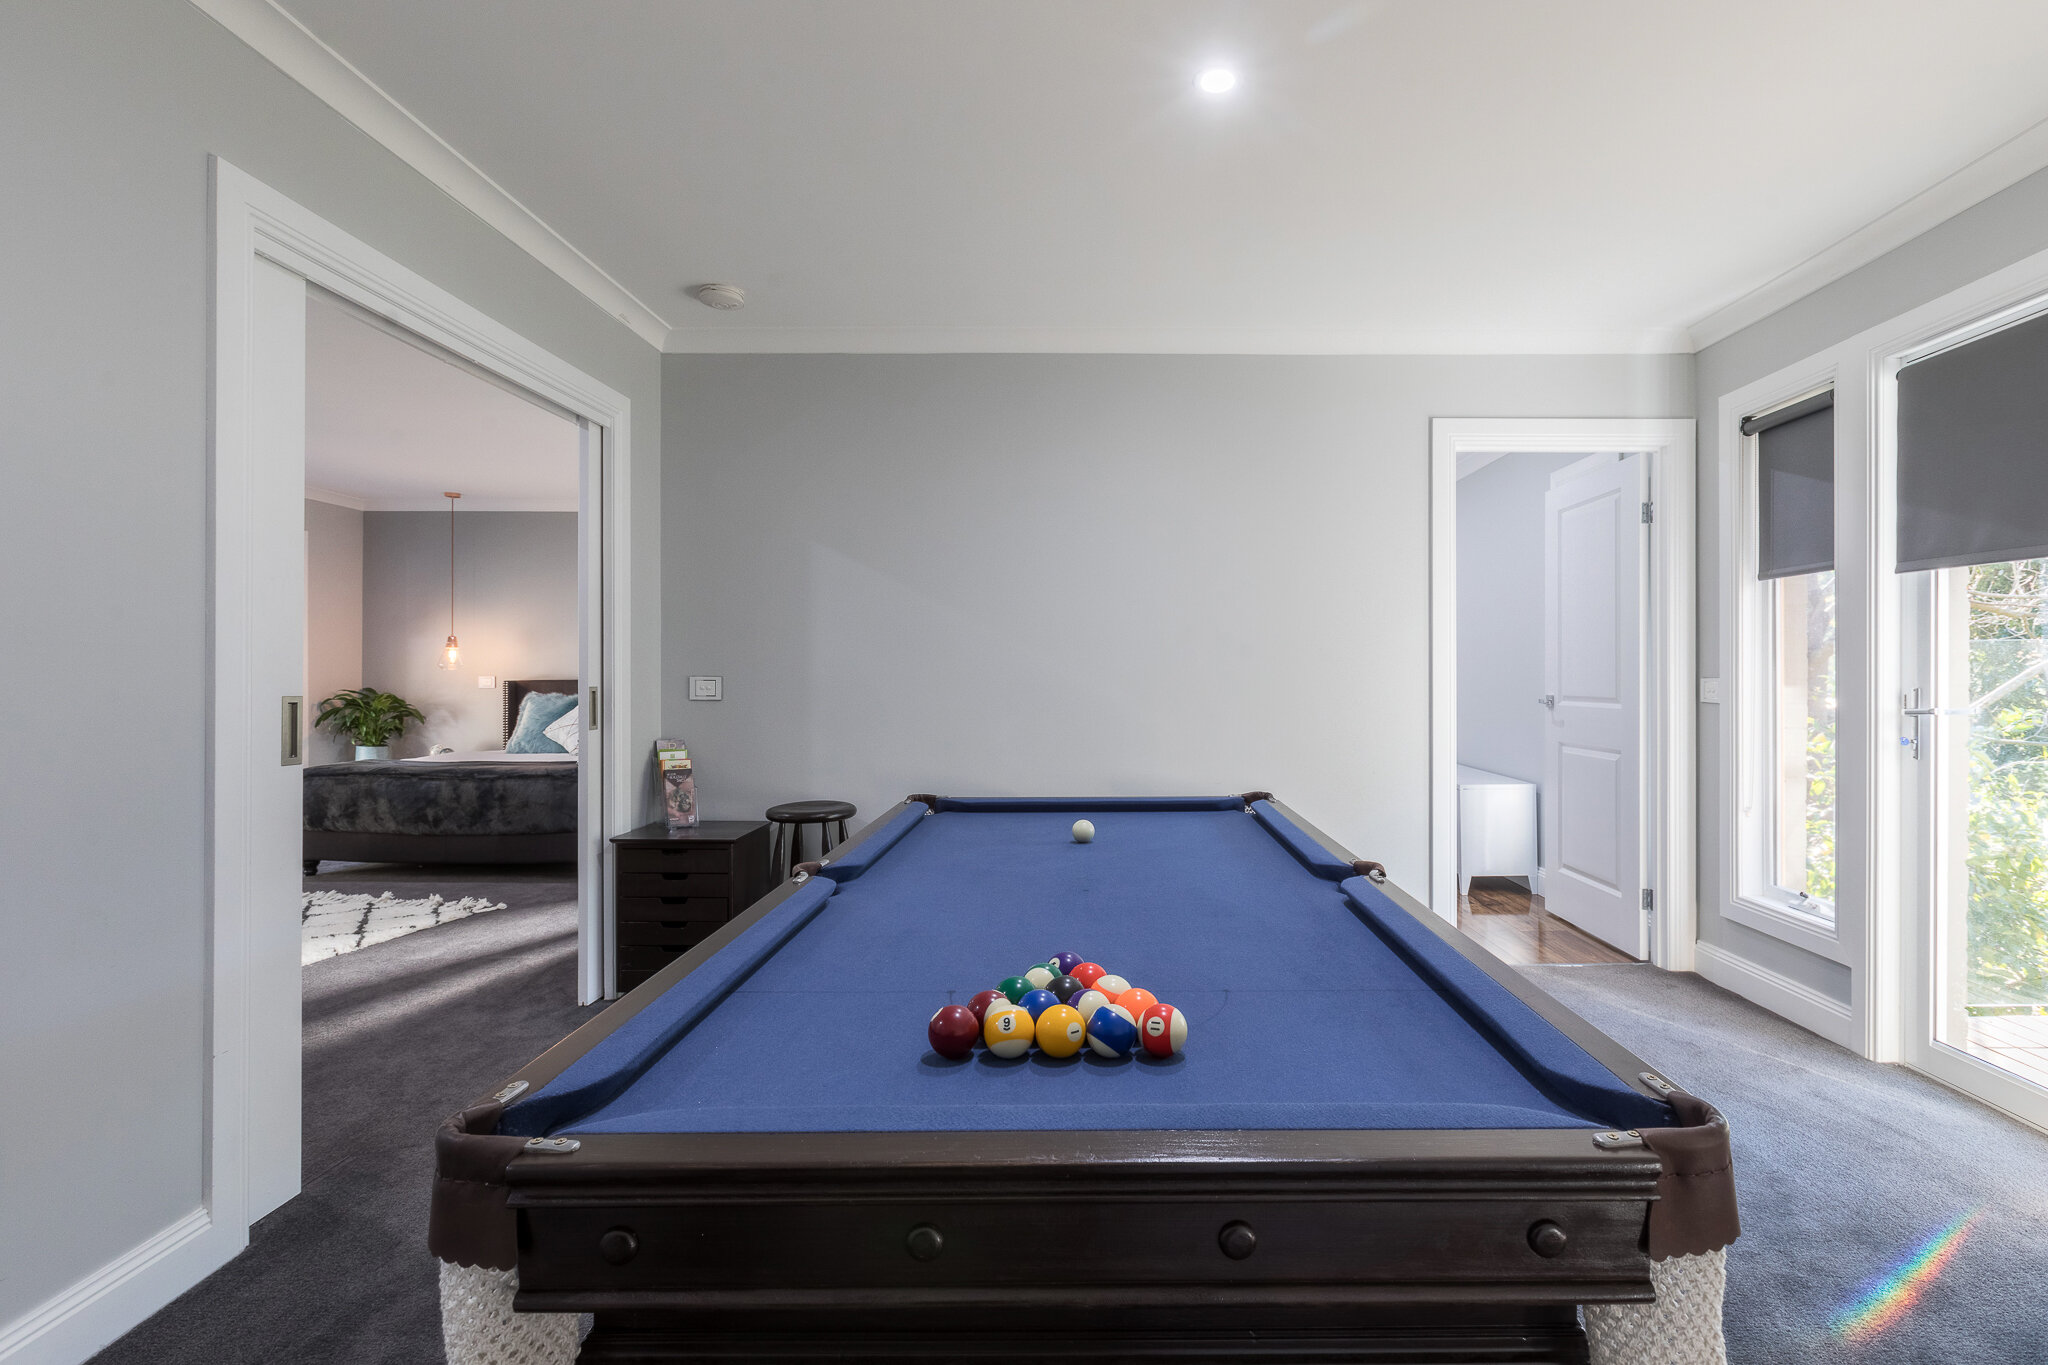 Something fun for the whole family at @rexsyarravalleyhouse 🙌🏼 

Pool table for the adults and the perfect play nook for the kids! 

Book your stay 👇🏻
https://www.yarravalleyholidays.com.au/rexs-yarra-valley-house